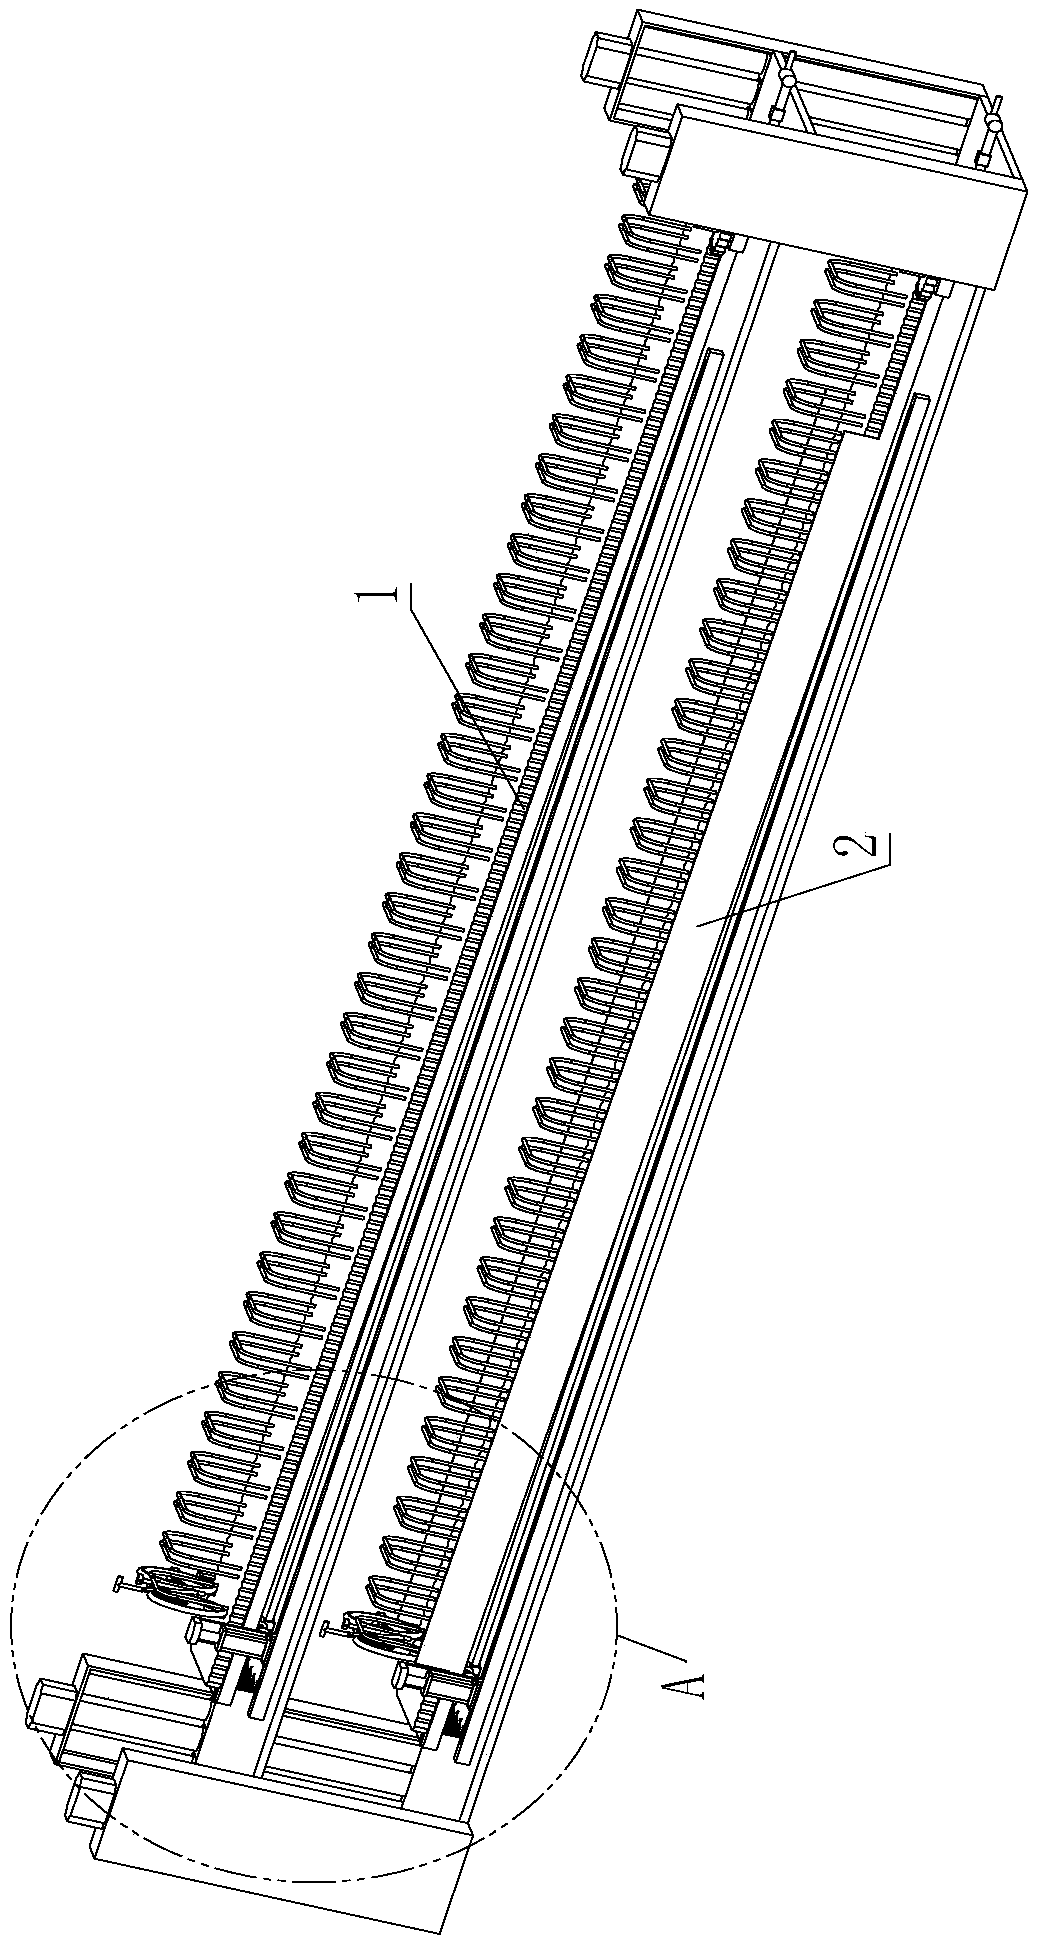 Vehicle parking device for transporting shared bicycles